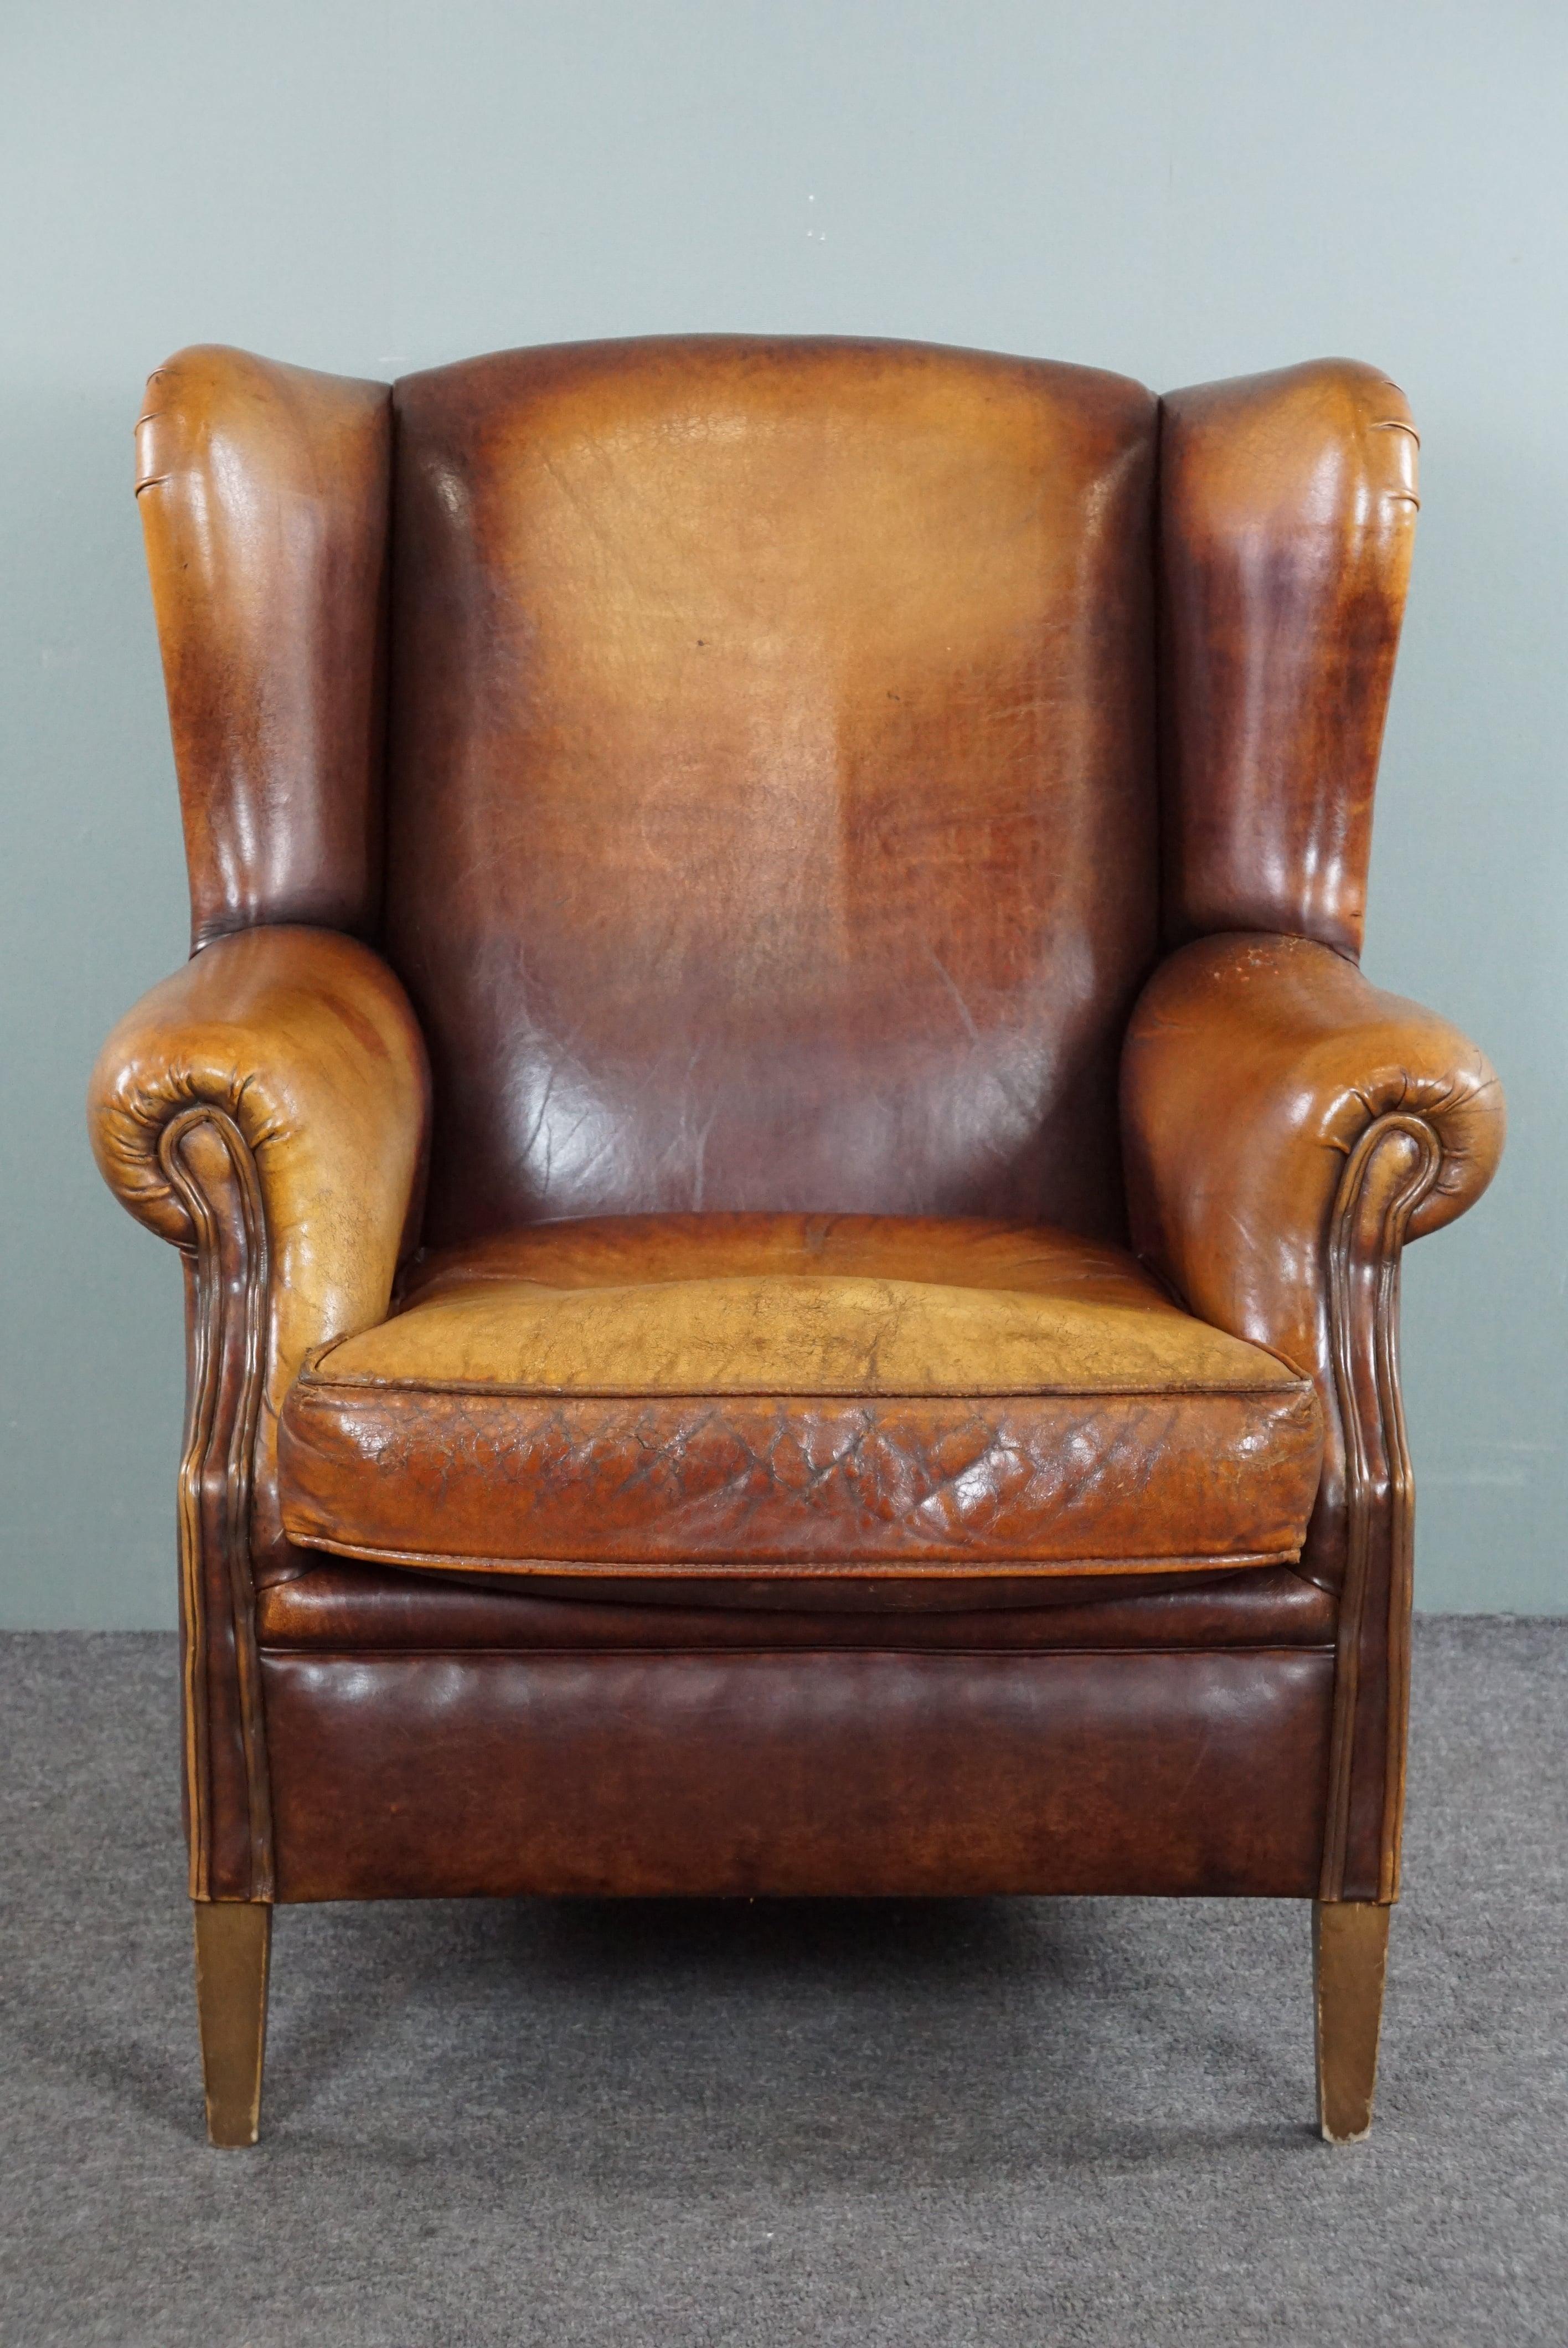 Offered is this beautiful worn sheepskin leather wing chair in a great color scheme!

This striking wing chair with a lived-in look has a beautiful variety of colors in the sheep leather. Through use, this armchair has acquired a beautiful character